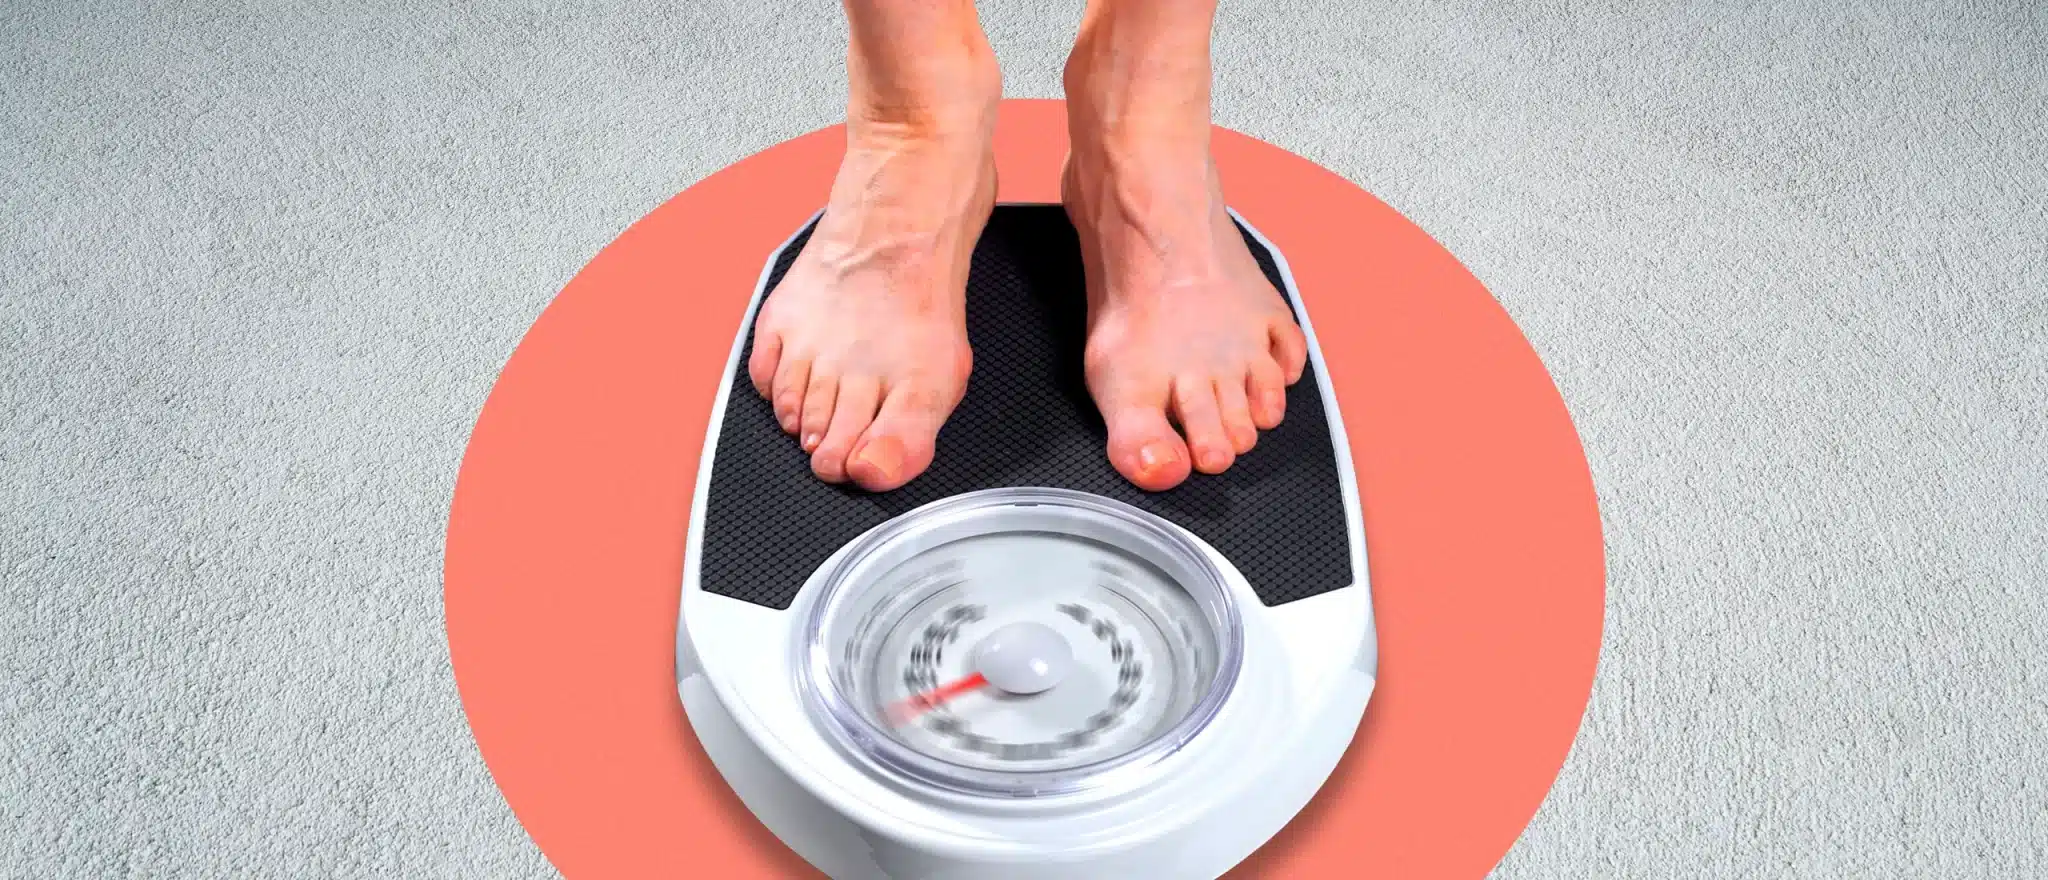 10 Sneaky Reasons You’ve Suddenly Gained Weight